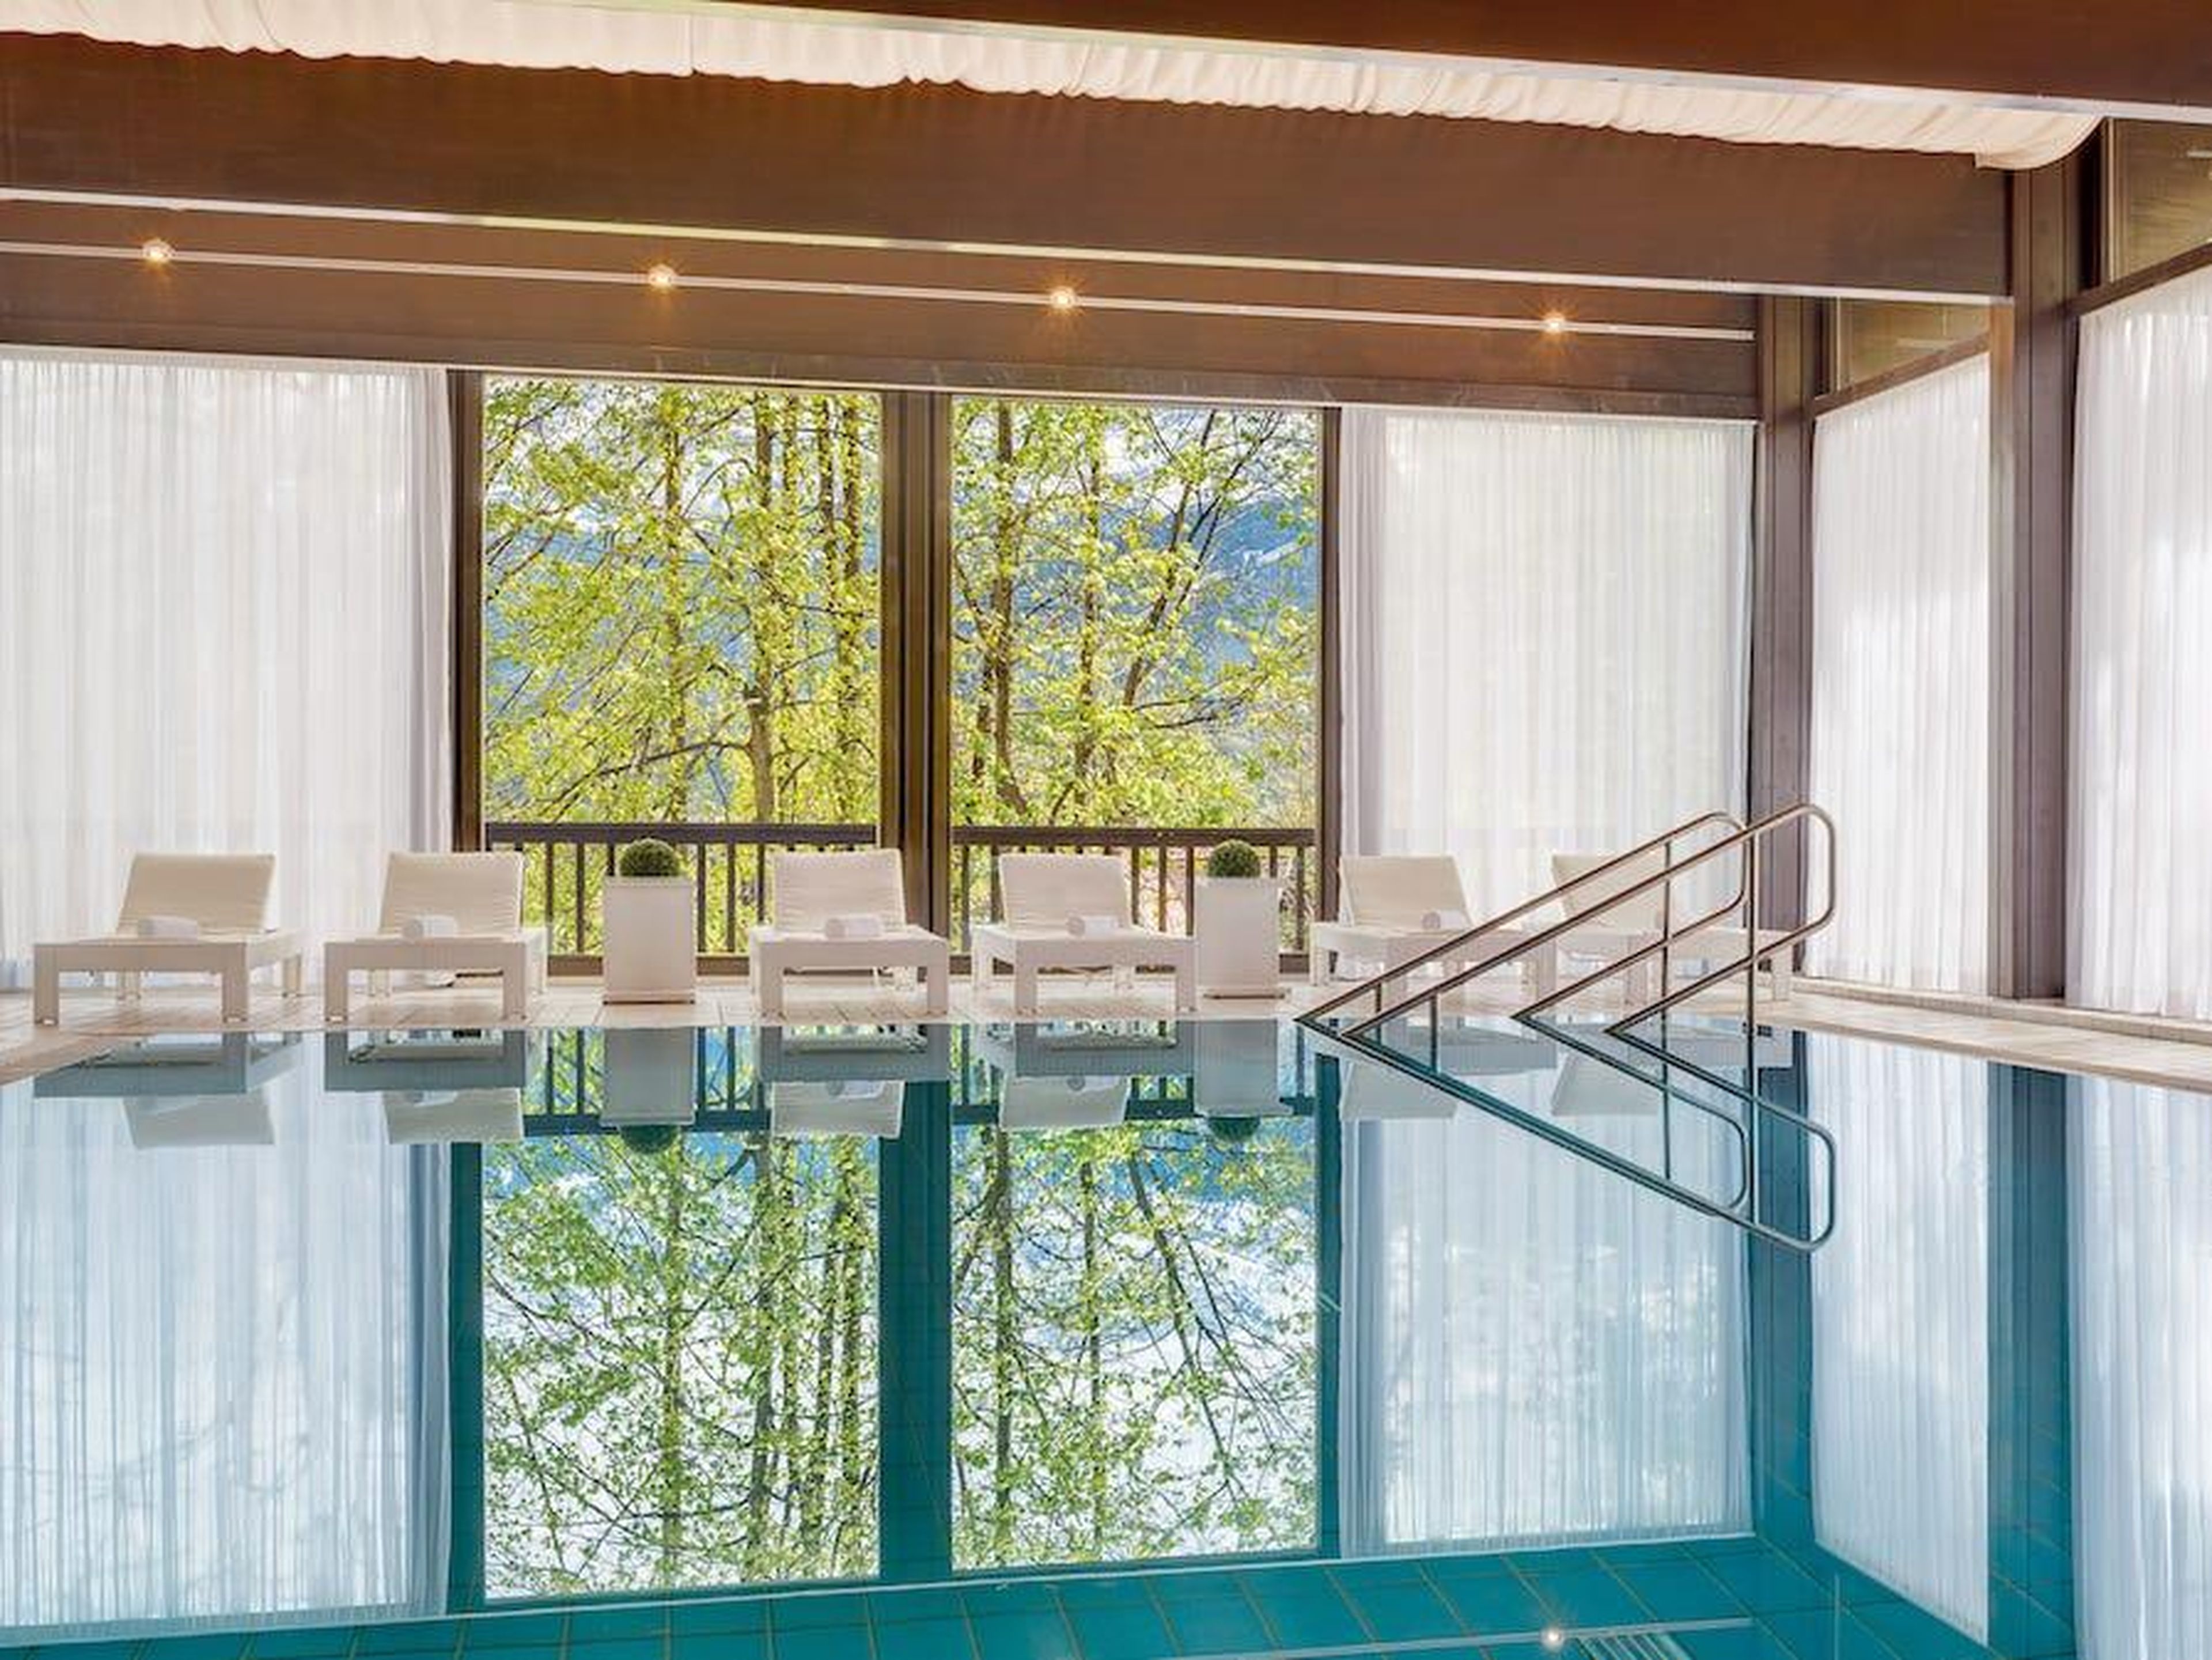 The indoor swimming pool is another scenic spot, boasting a large window front and panoramic view of the Alps. In addition to the pool, the hotel has a sauna and fitness studio.